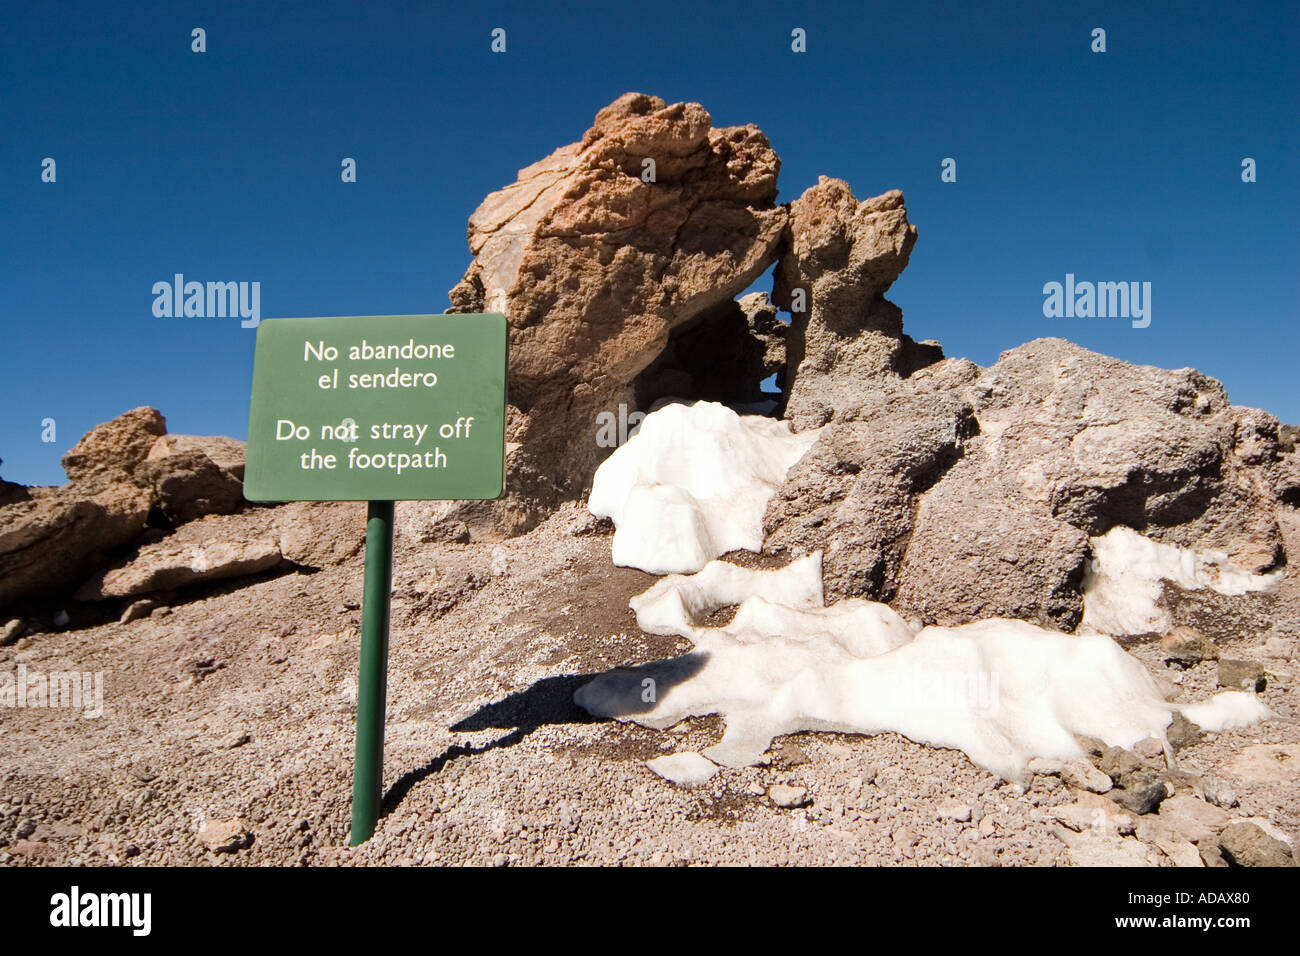 Warning sign Do not stray off footpath in English and Spanish near the summit of Mount Teide Tenerife Canary Islands Spain Stock Photo